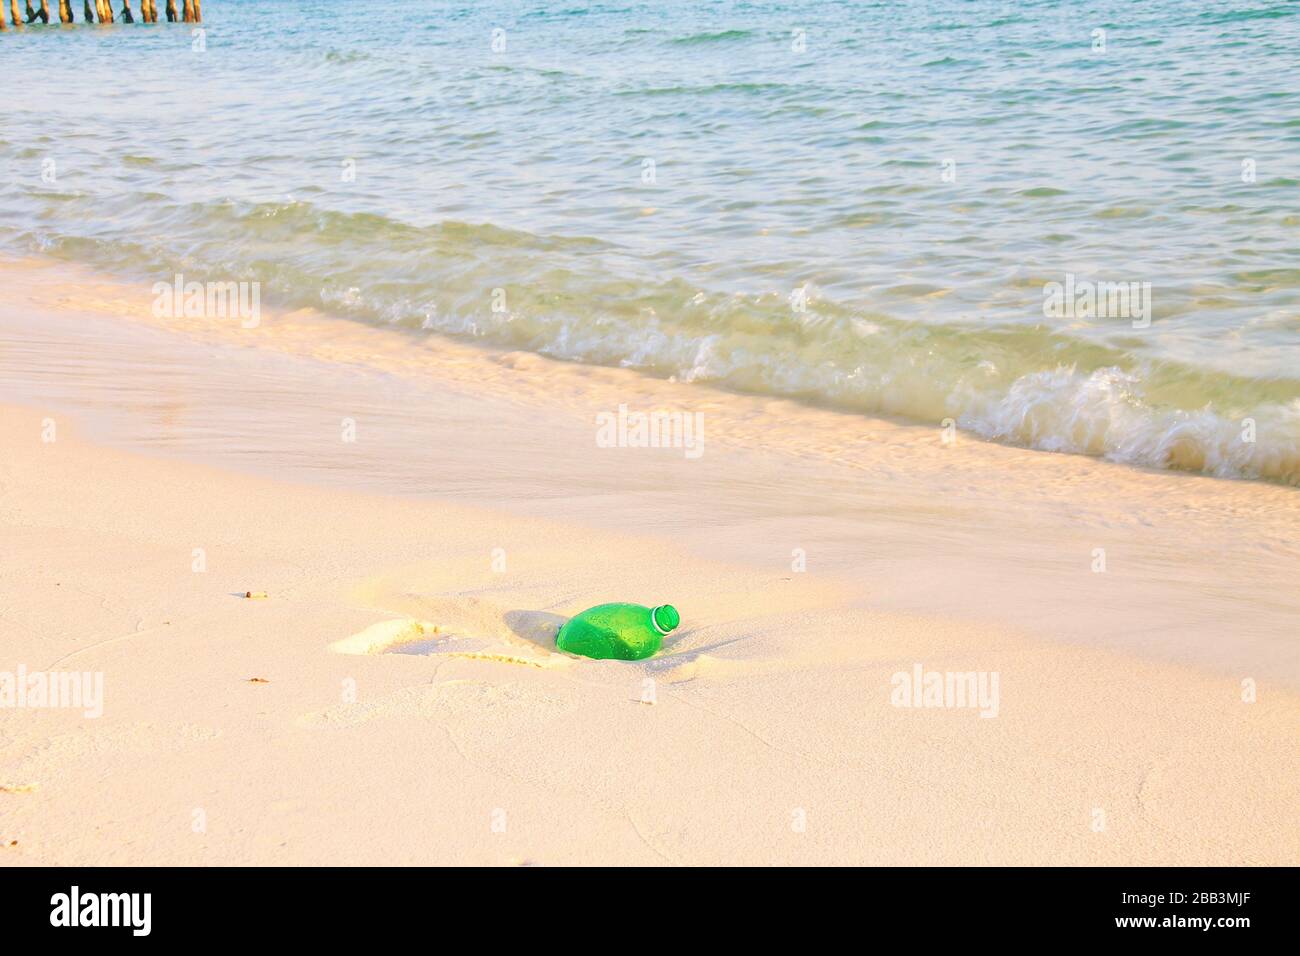 Garbage along the coast of Koh rong Island Soksan Beach in Cambodia that shows ocean pollution, environmental damage and human waste Stock Photo